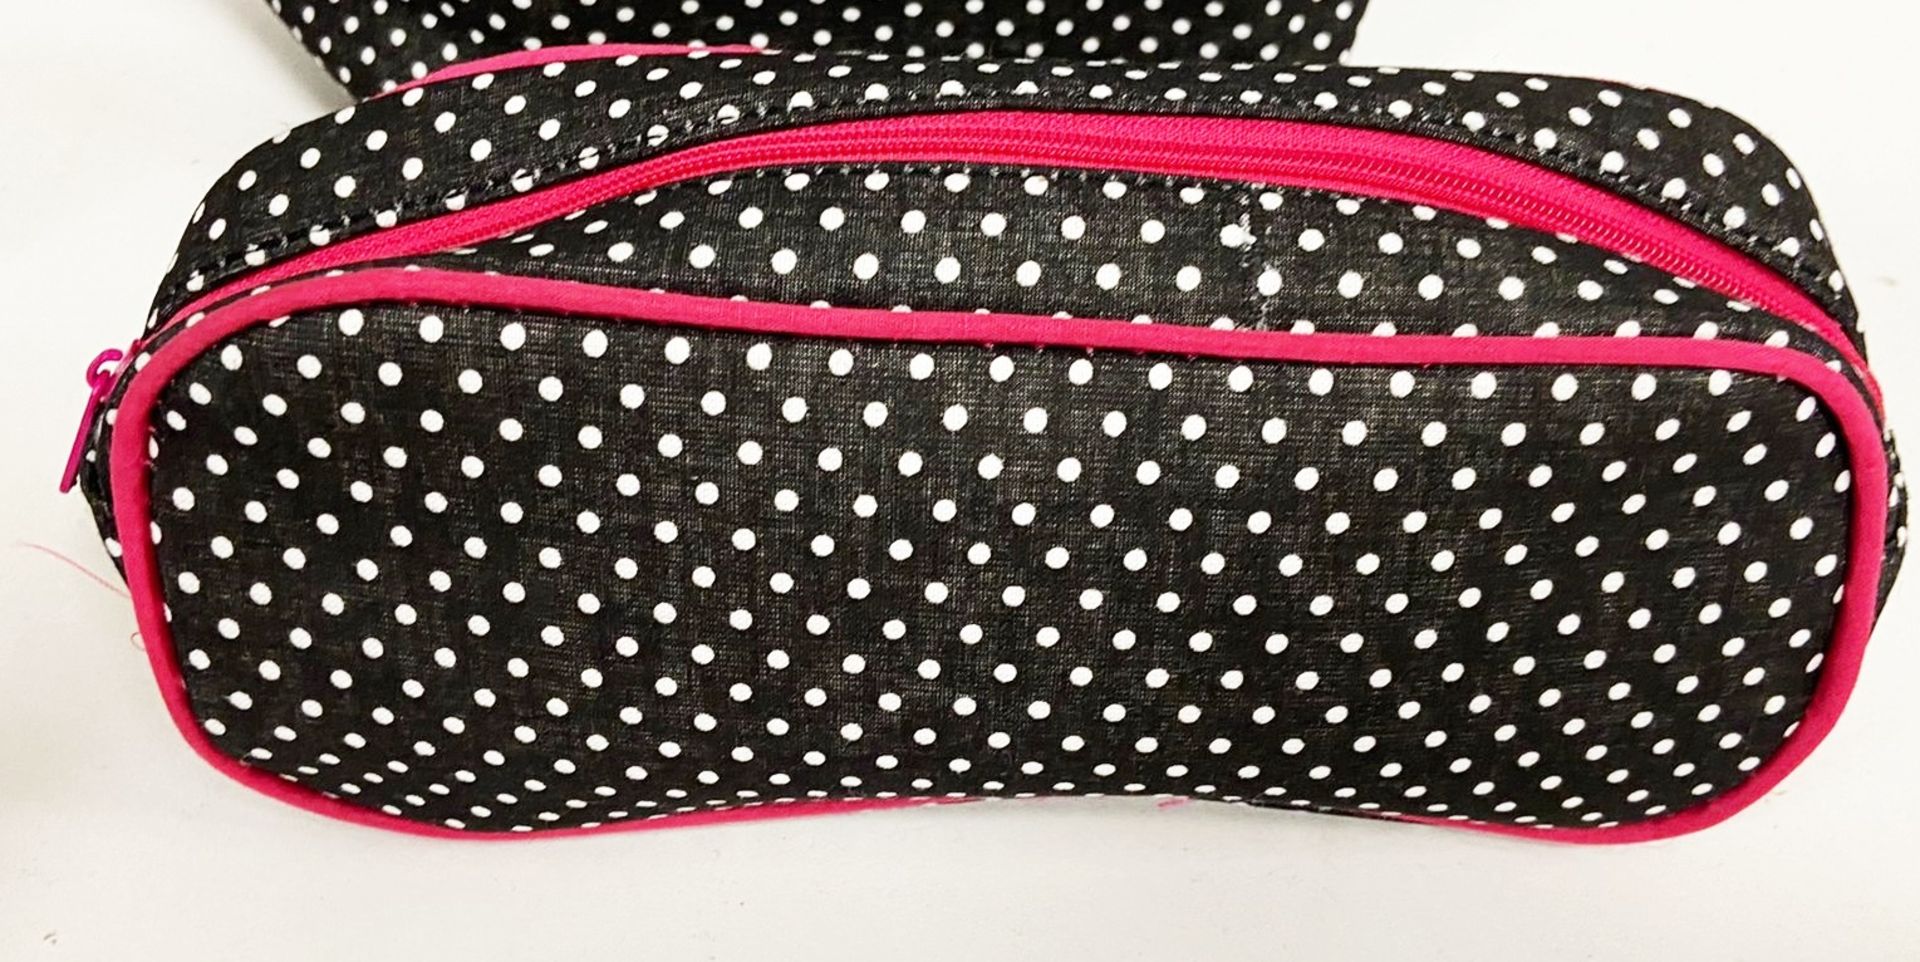 8 x EXCLUSIVE 3 in 1 Polka-Dot Make-Up Carrying Cases - Image 3 of 4